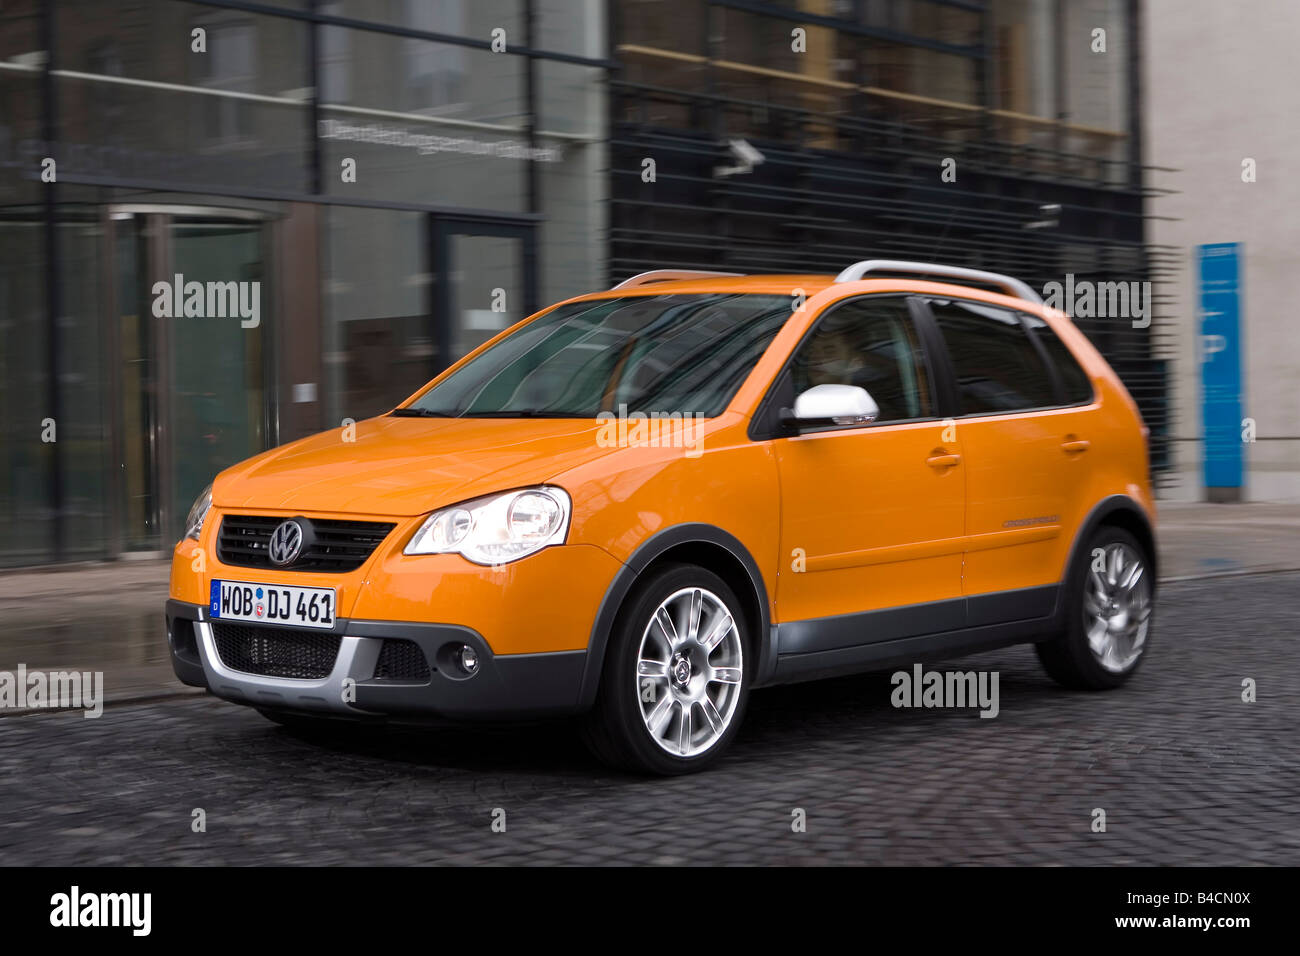 VW Volkswagen Cross Polo 1.4 TDI, model year 2006-, orange , driving,  diagonal from the front, frontal view, City Stock Photo - Alamy